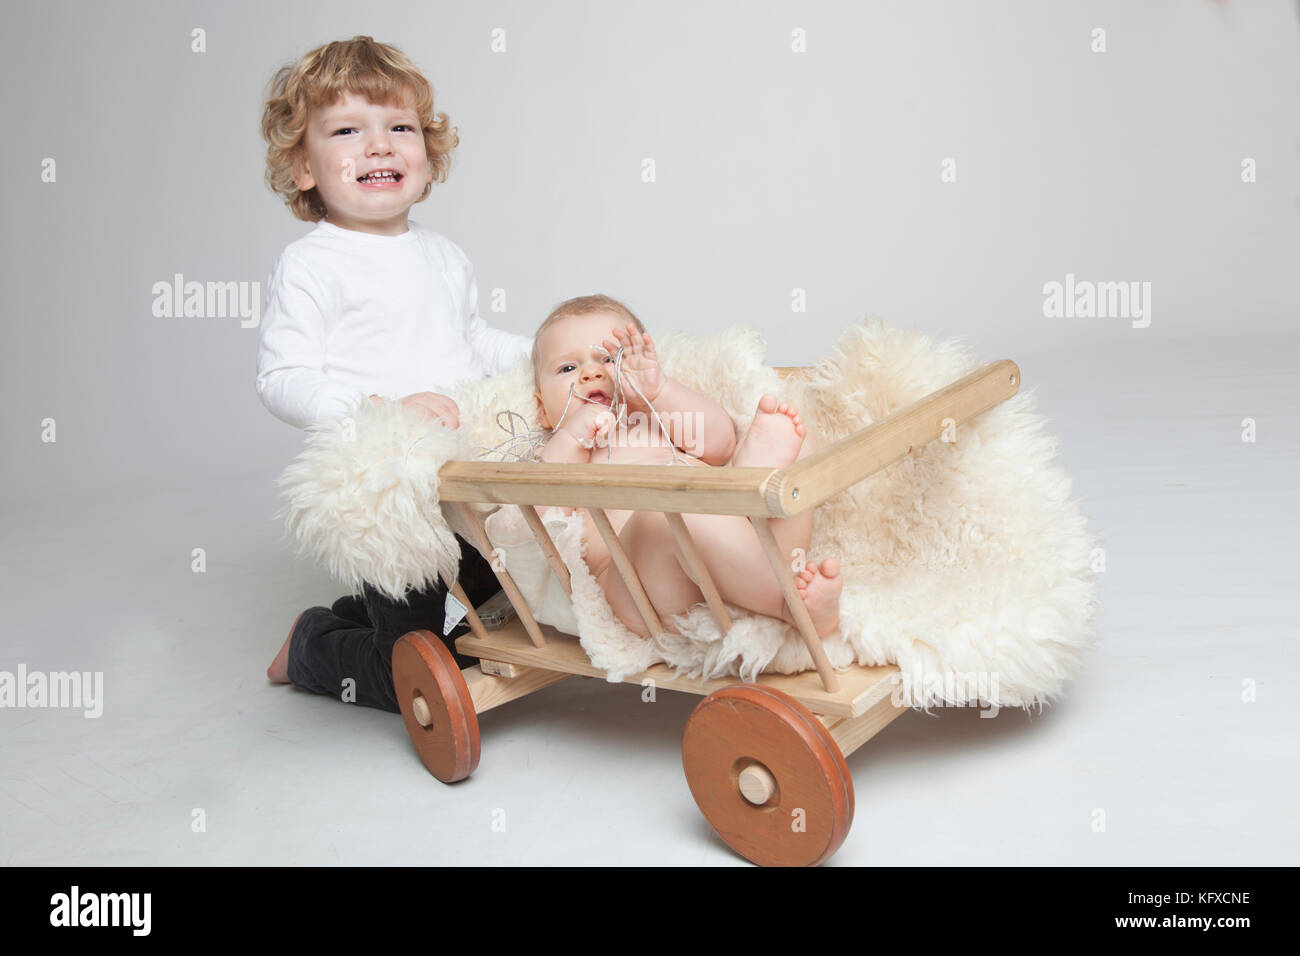 Two generation family studio portrait on grey and white background. Stock Photo